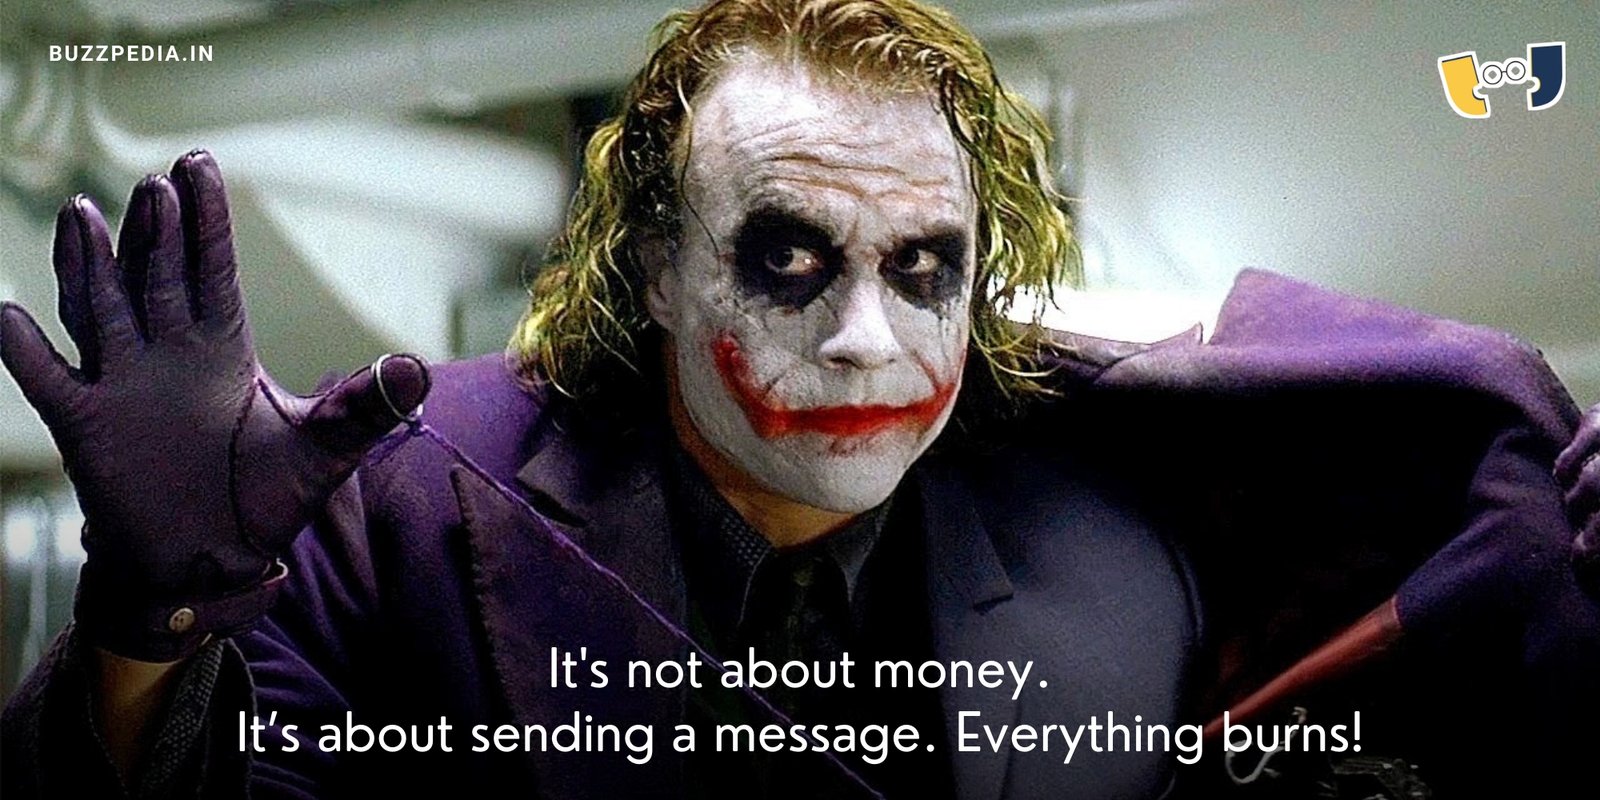 Batman Fan? Here Are 10 Of The Best Joker Quotes From “The Dark Knight”